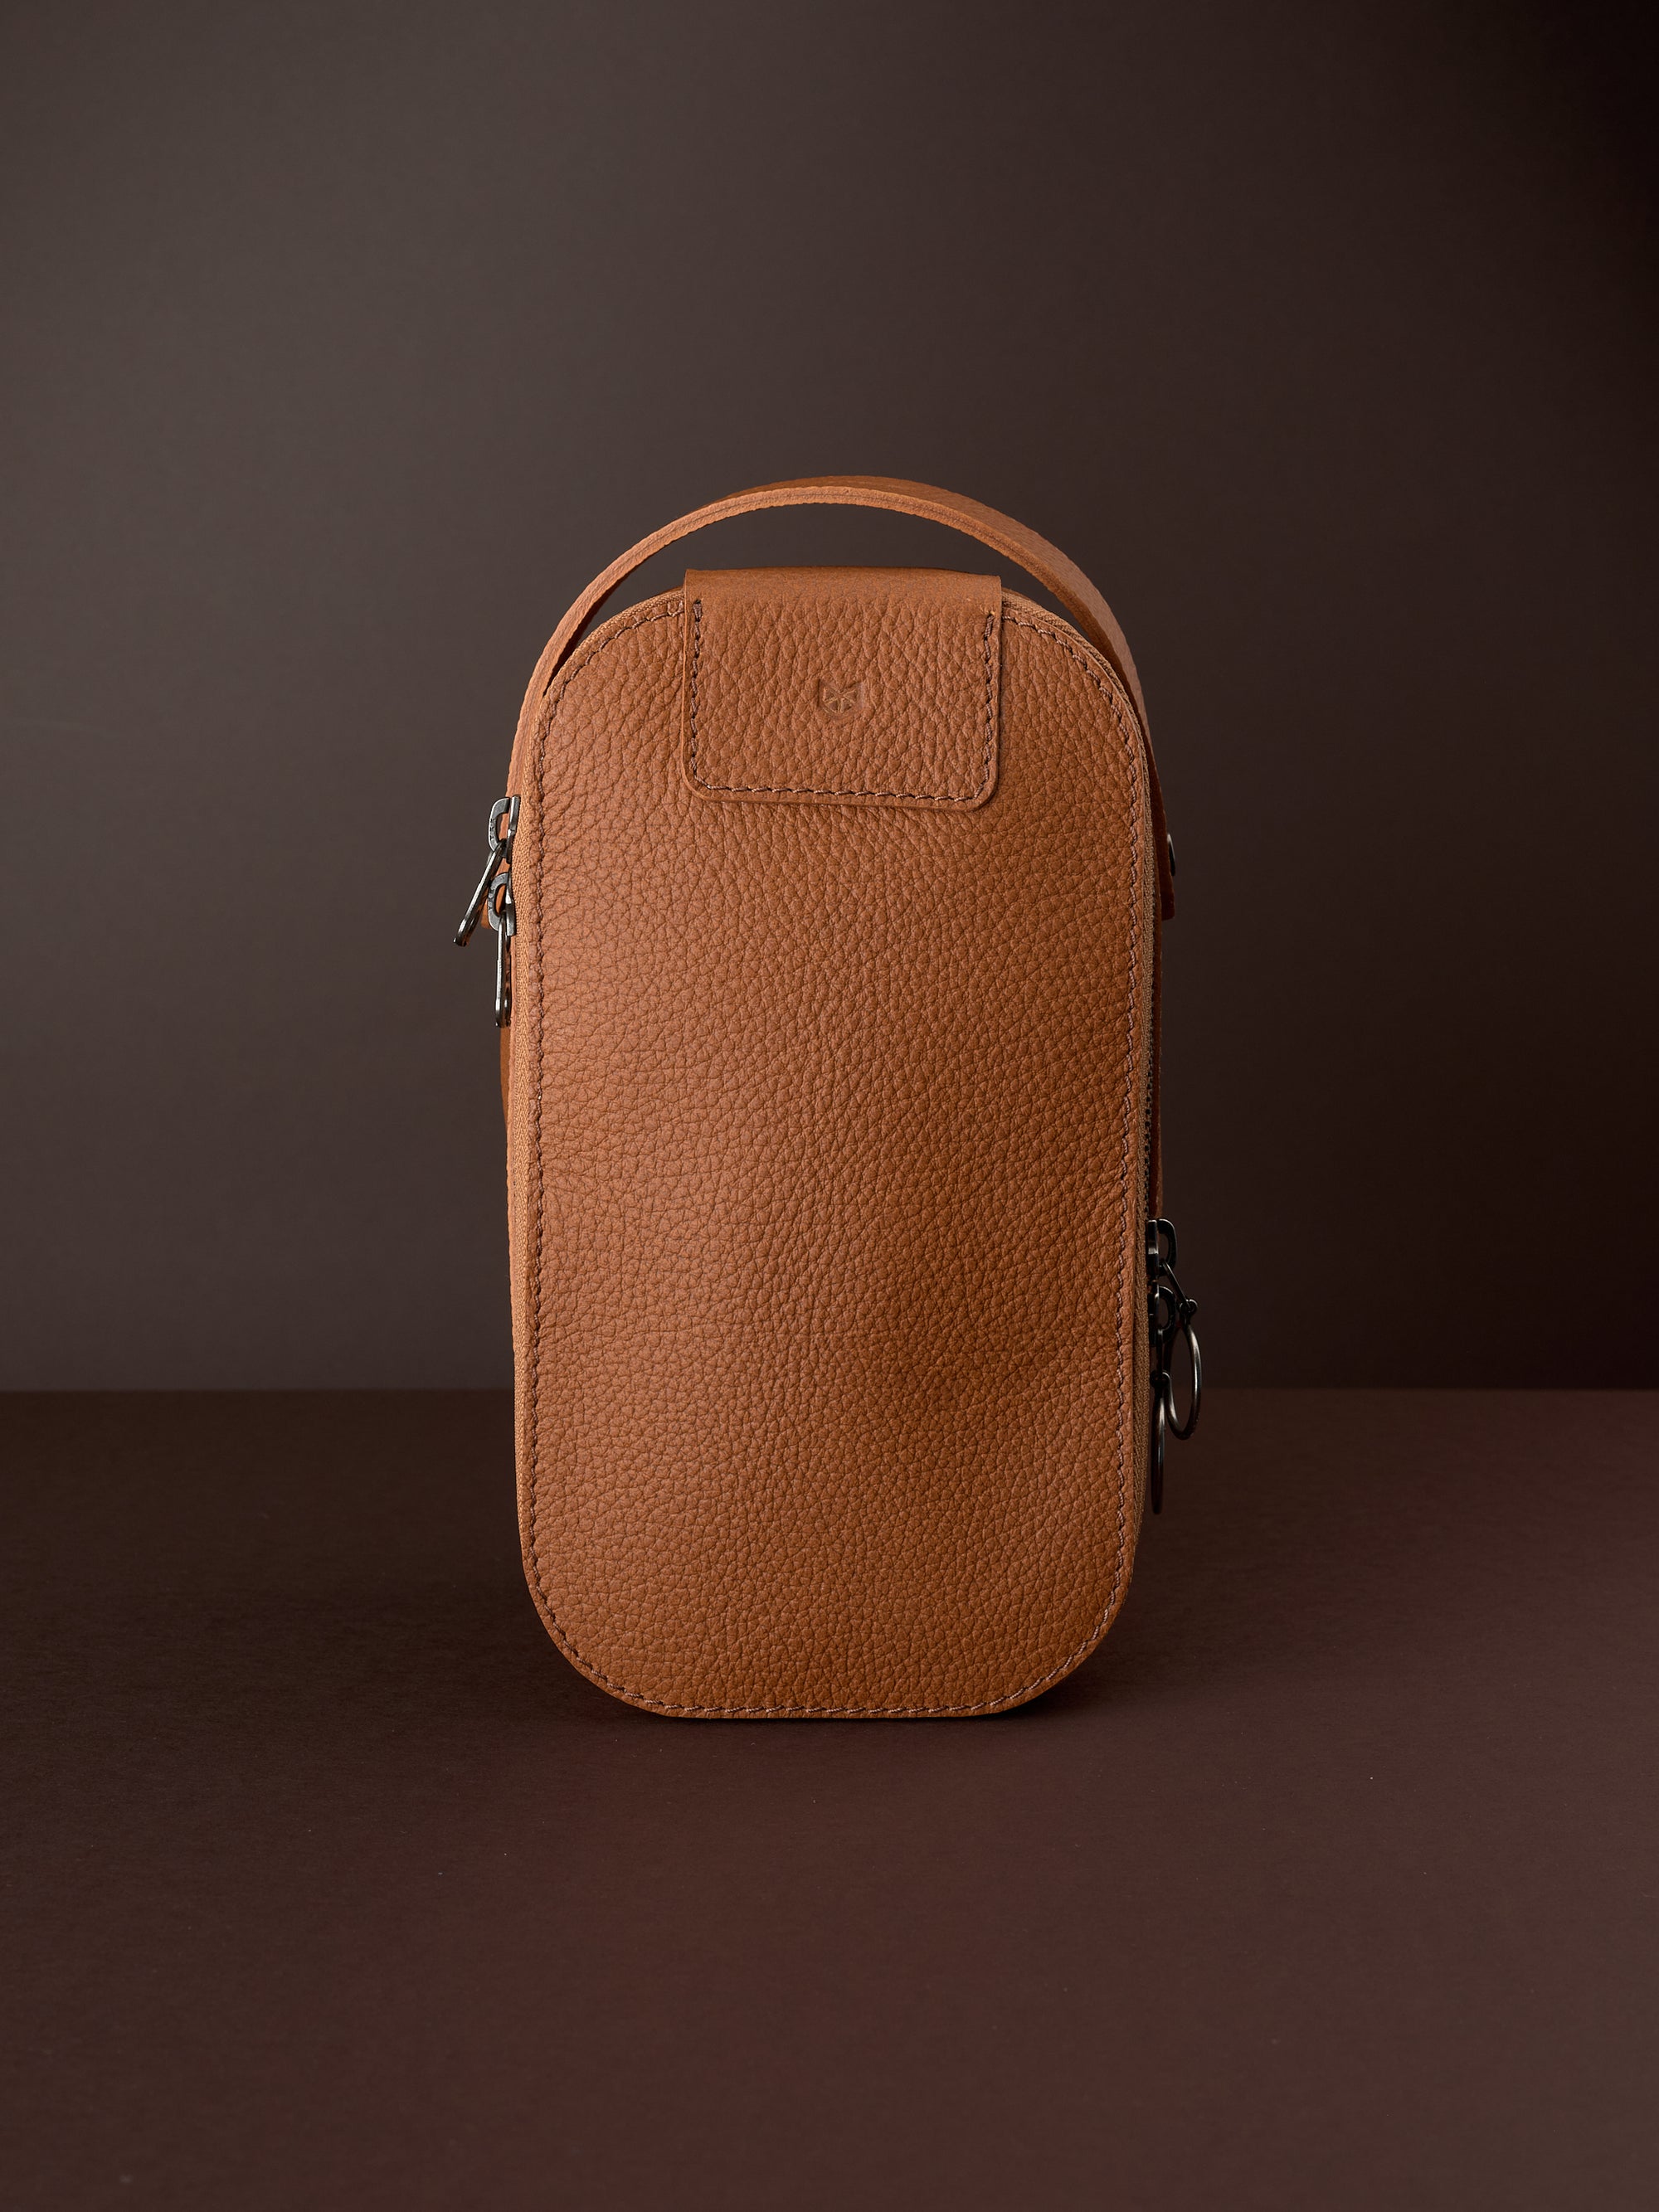 Personalized toiletry bag tan by Capra Leather